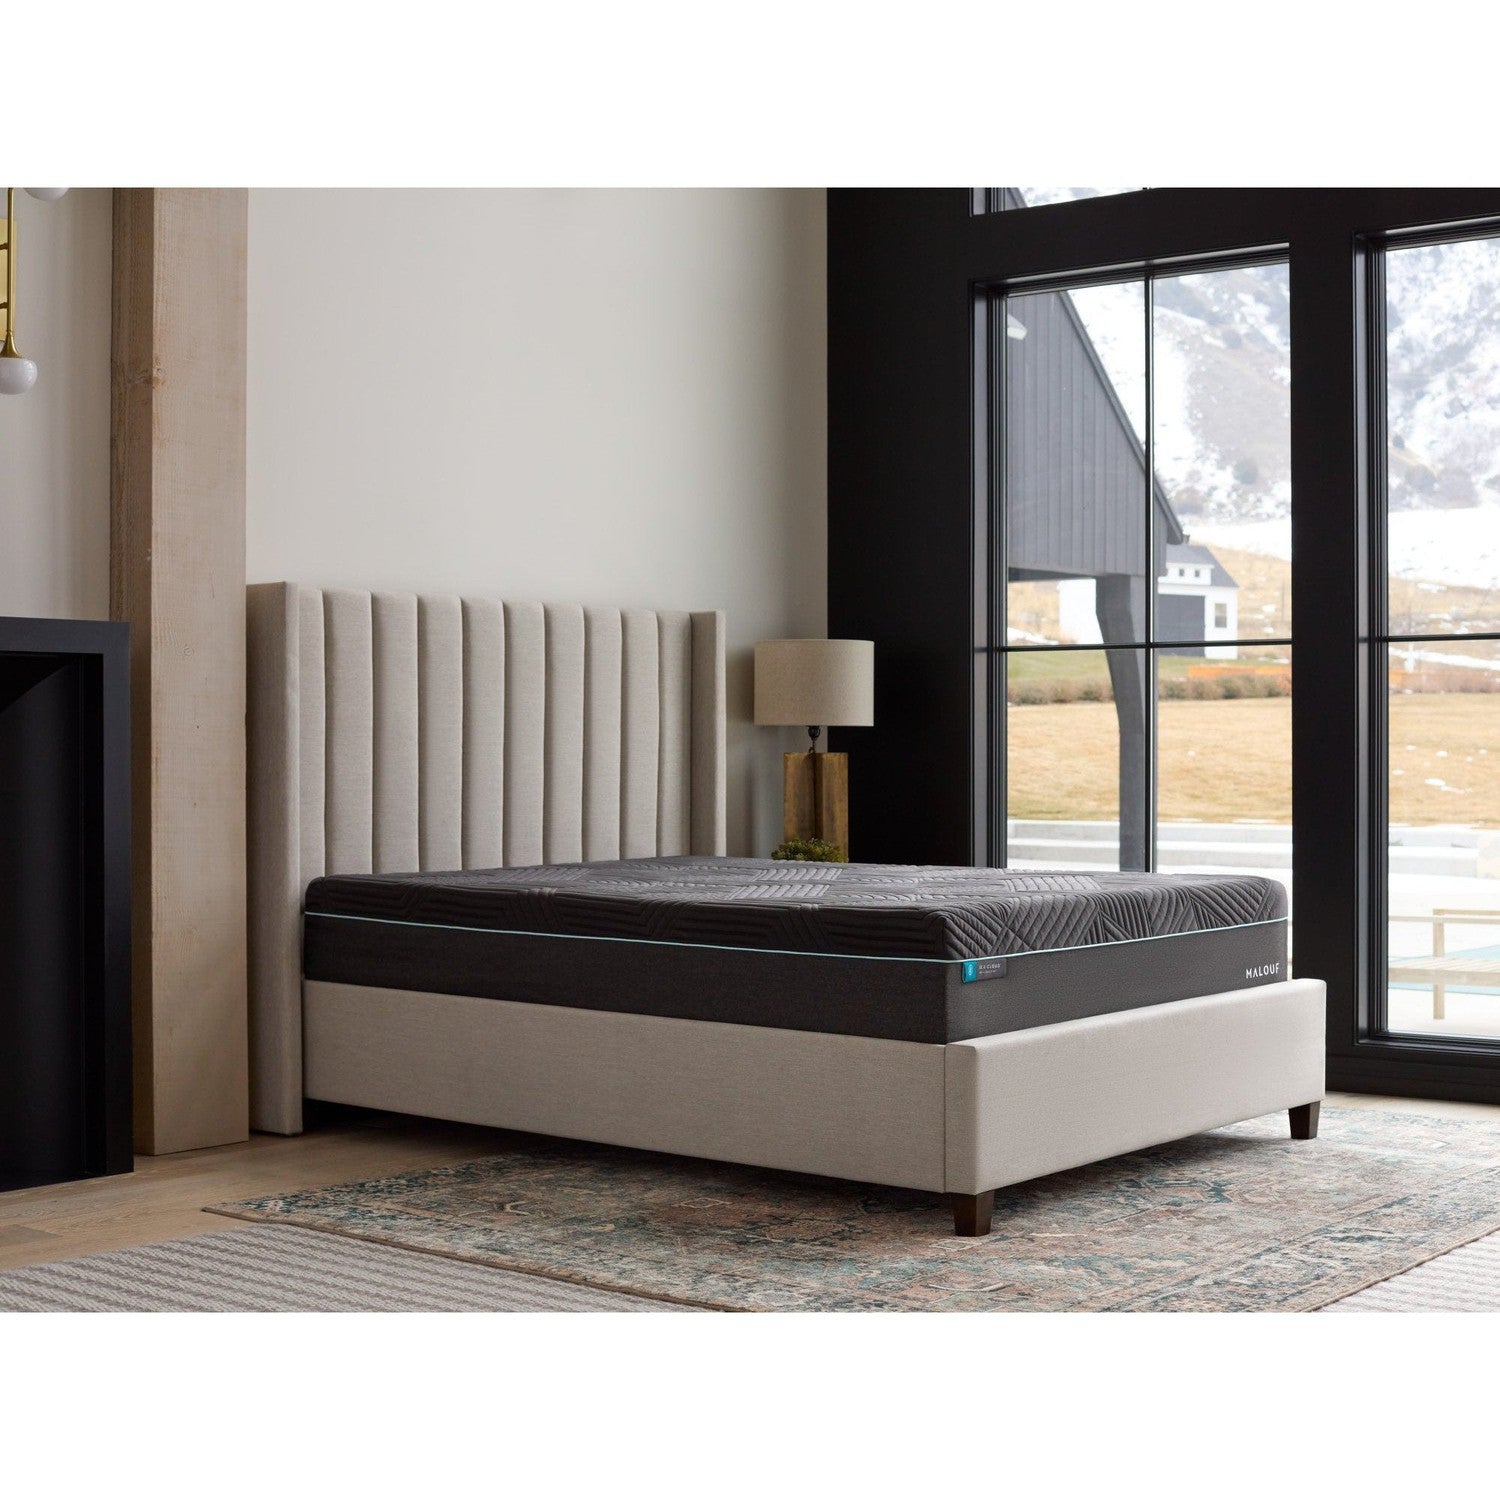 Malouf Ice Cloud CoolSync™ Mattress-Purely Relaxation